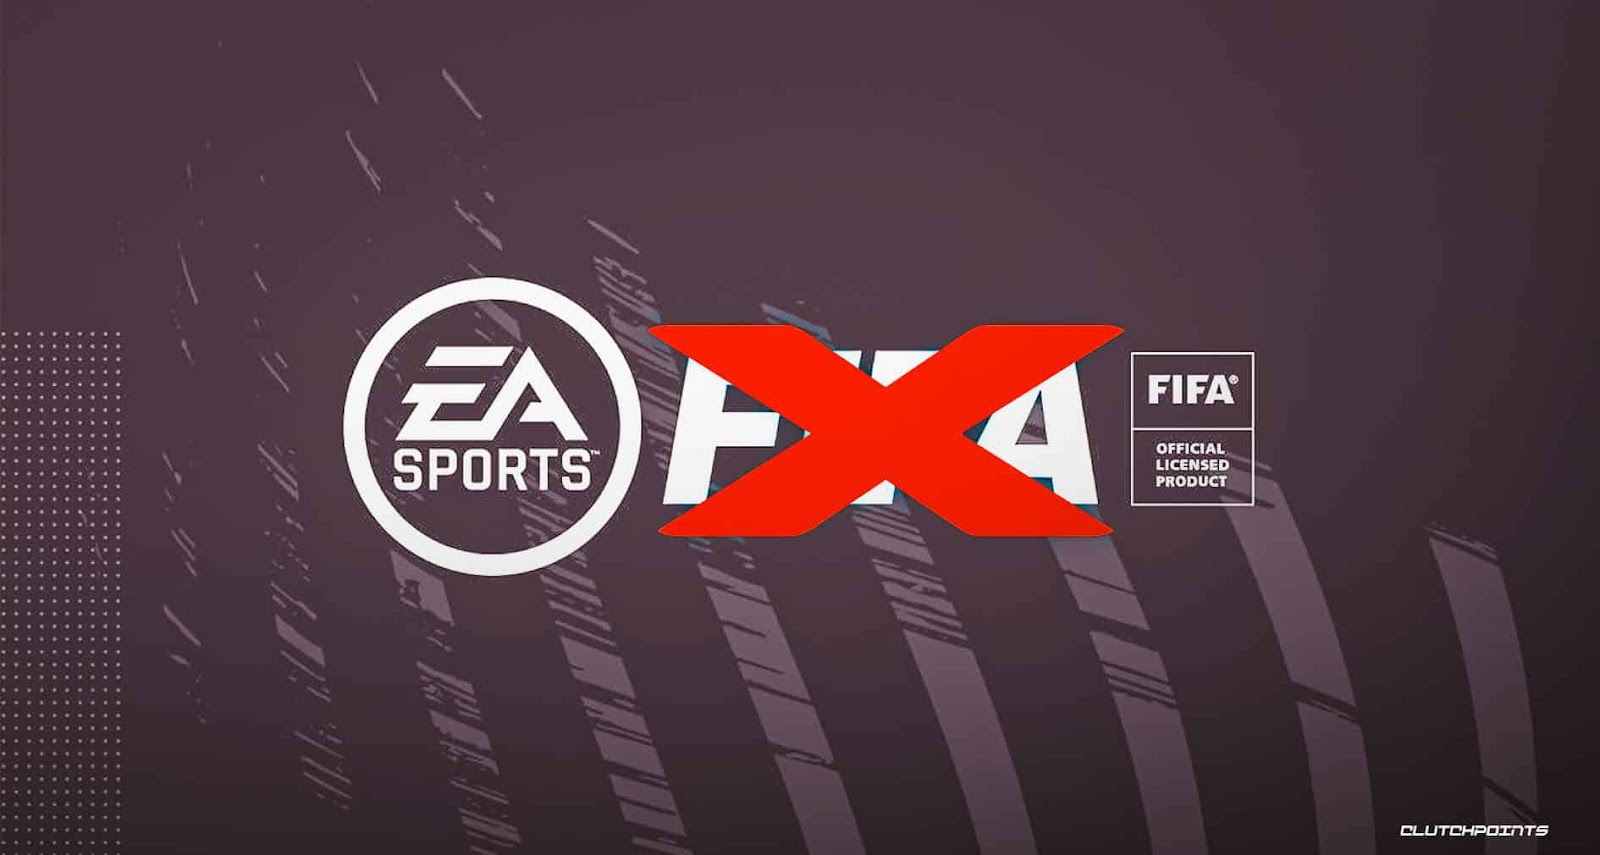 Possible EA FIFA Rebrand in the Works?